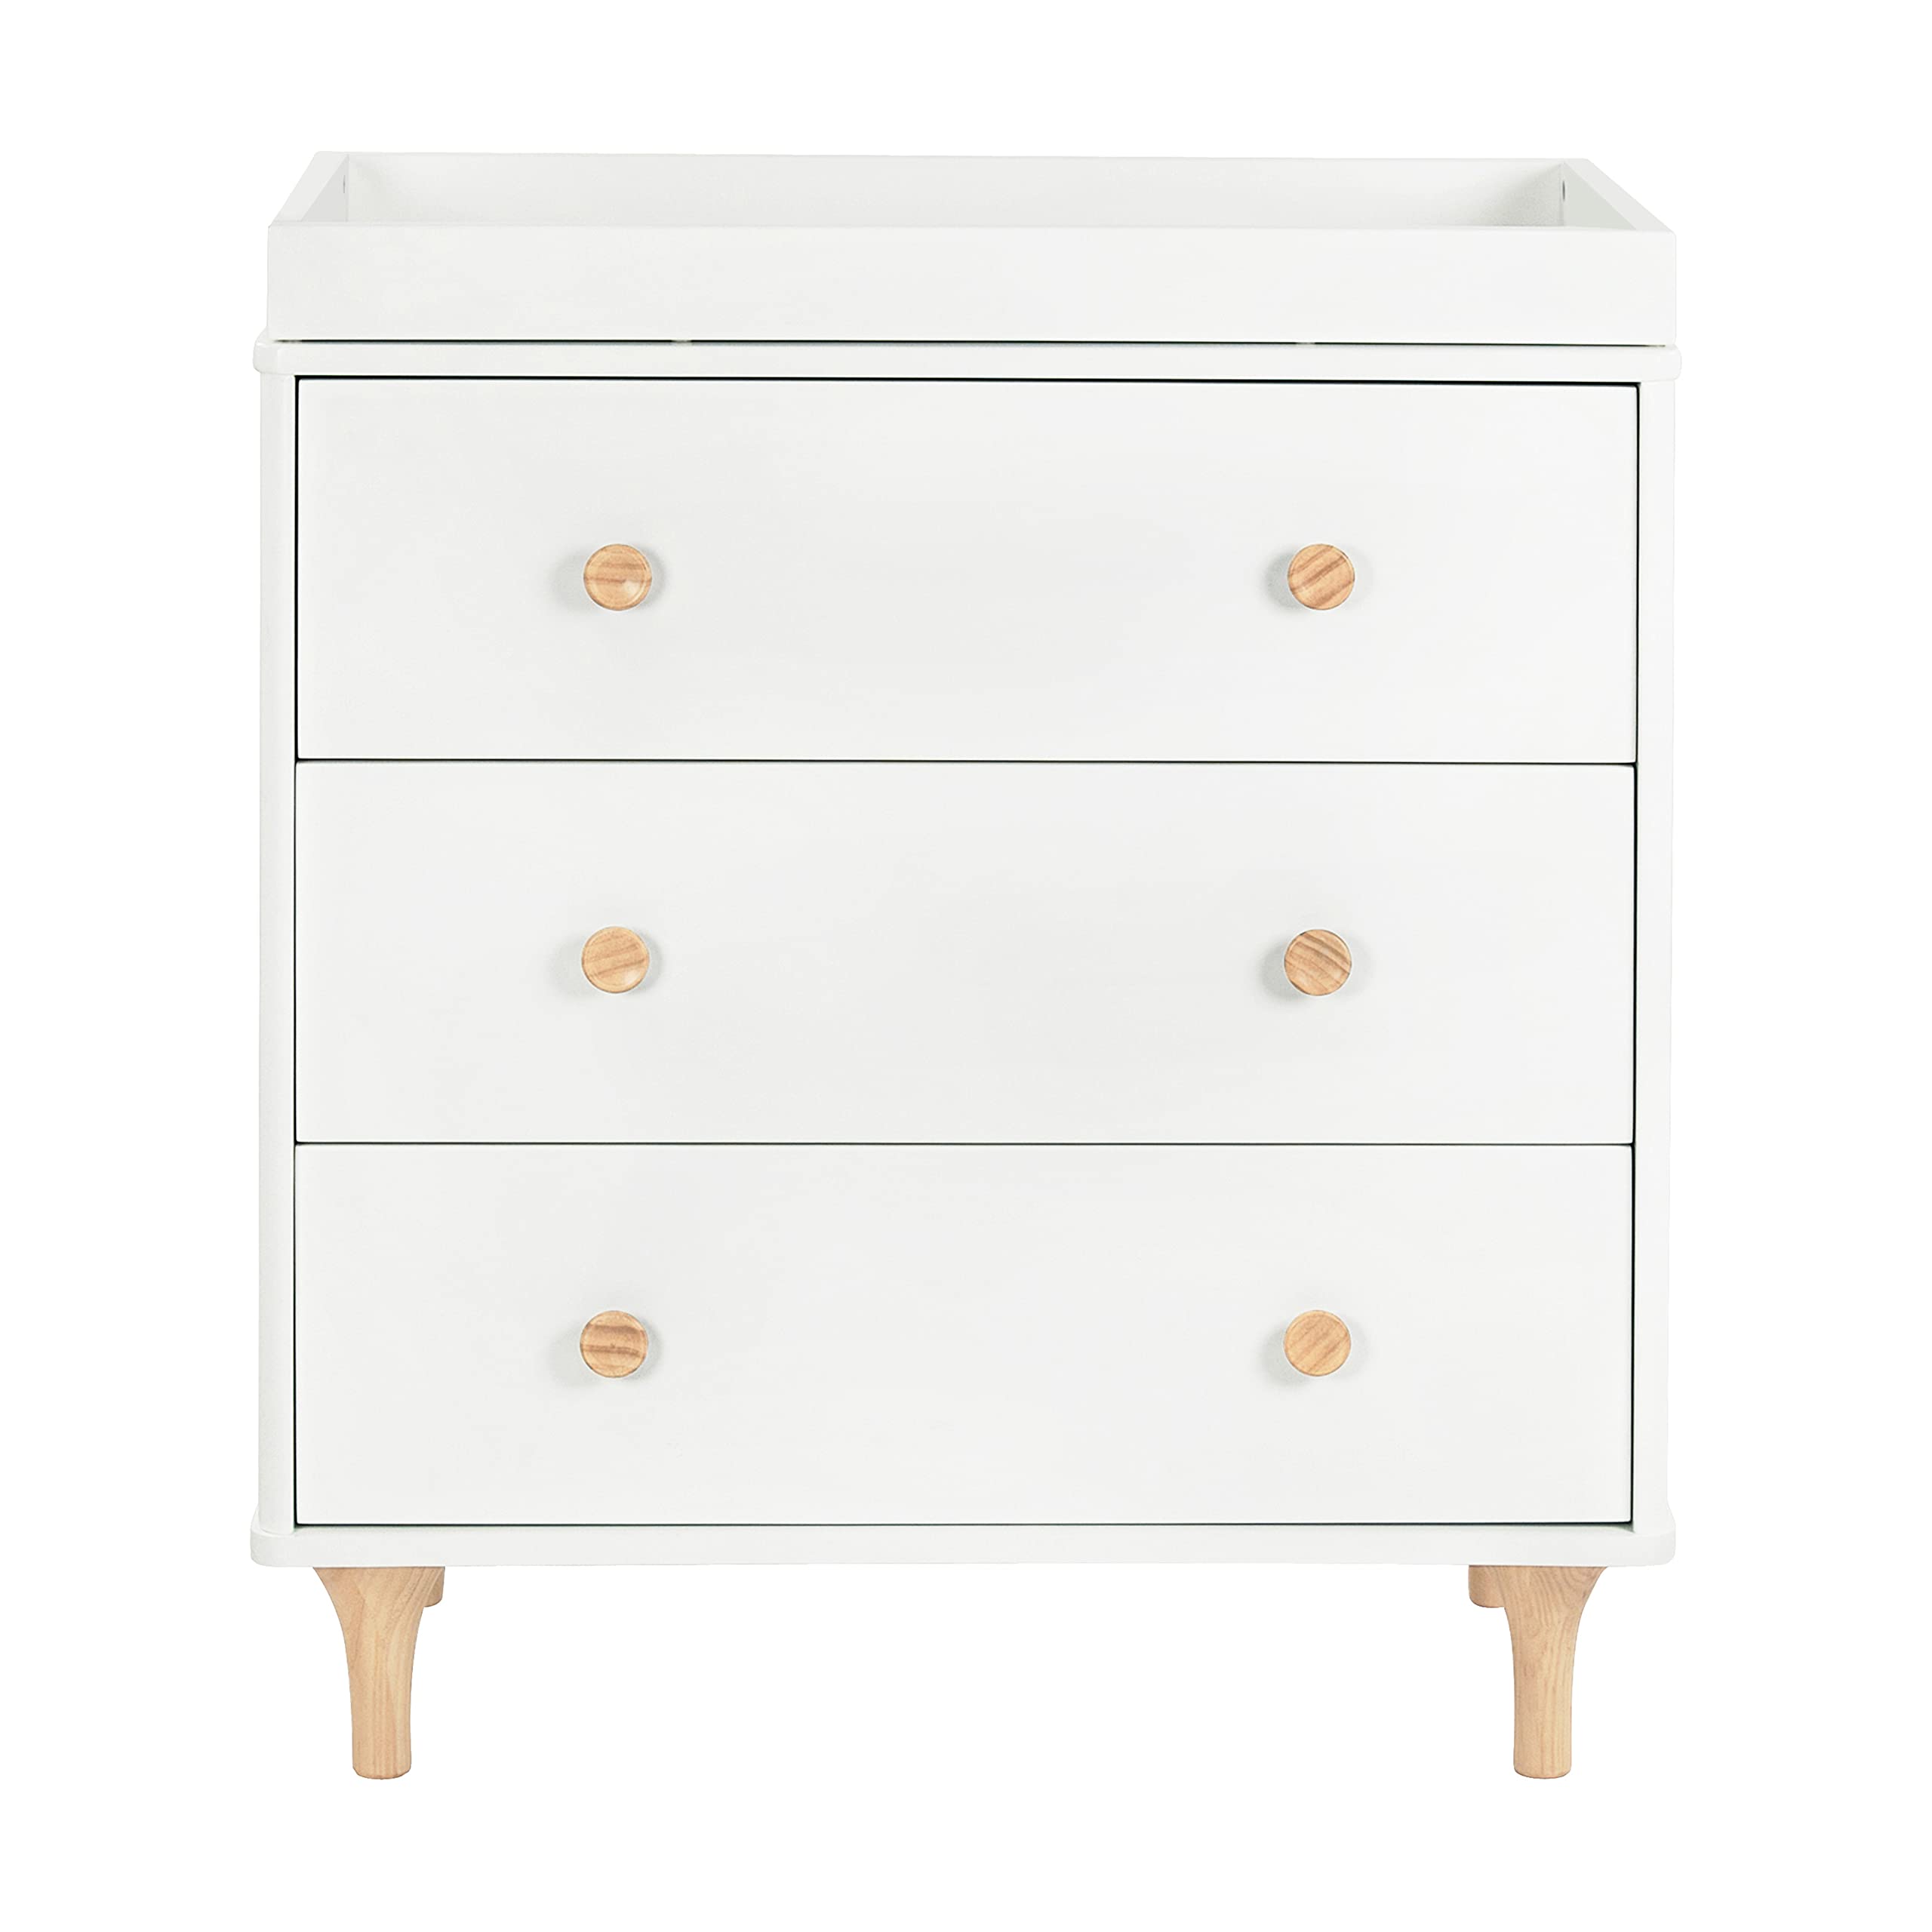 Babyletto Lolly 3-Drawer Changer Dresser with Removable Changing Tray in White and Natural, Greenguard Gold Certified